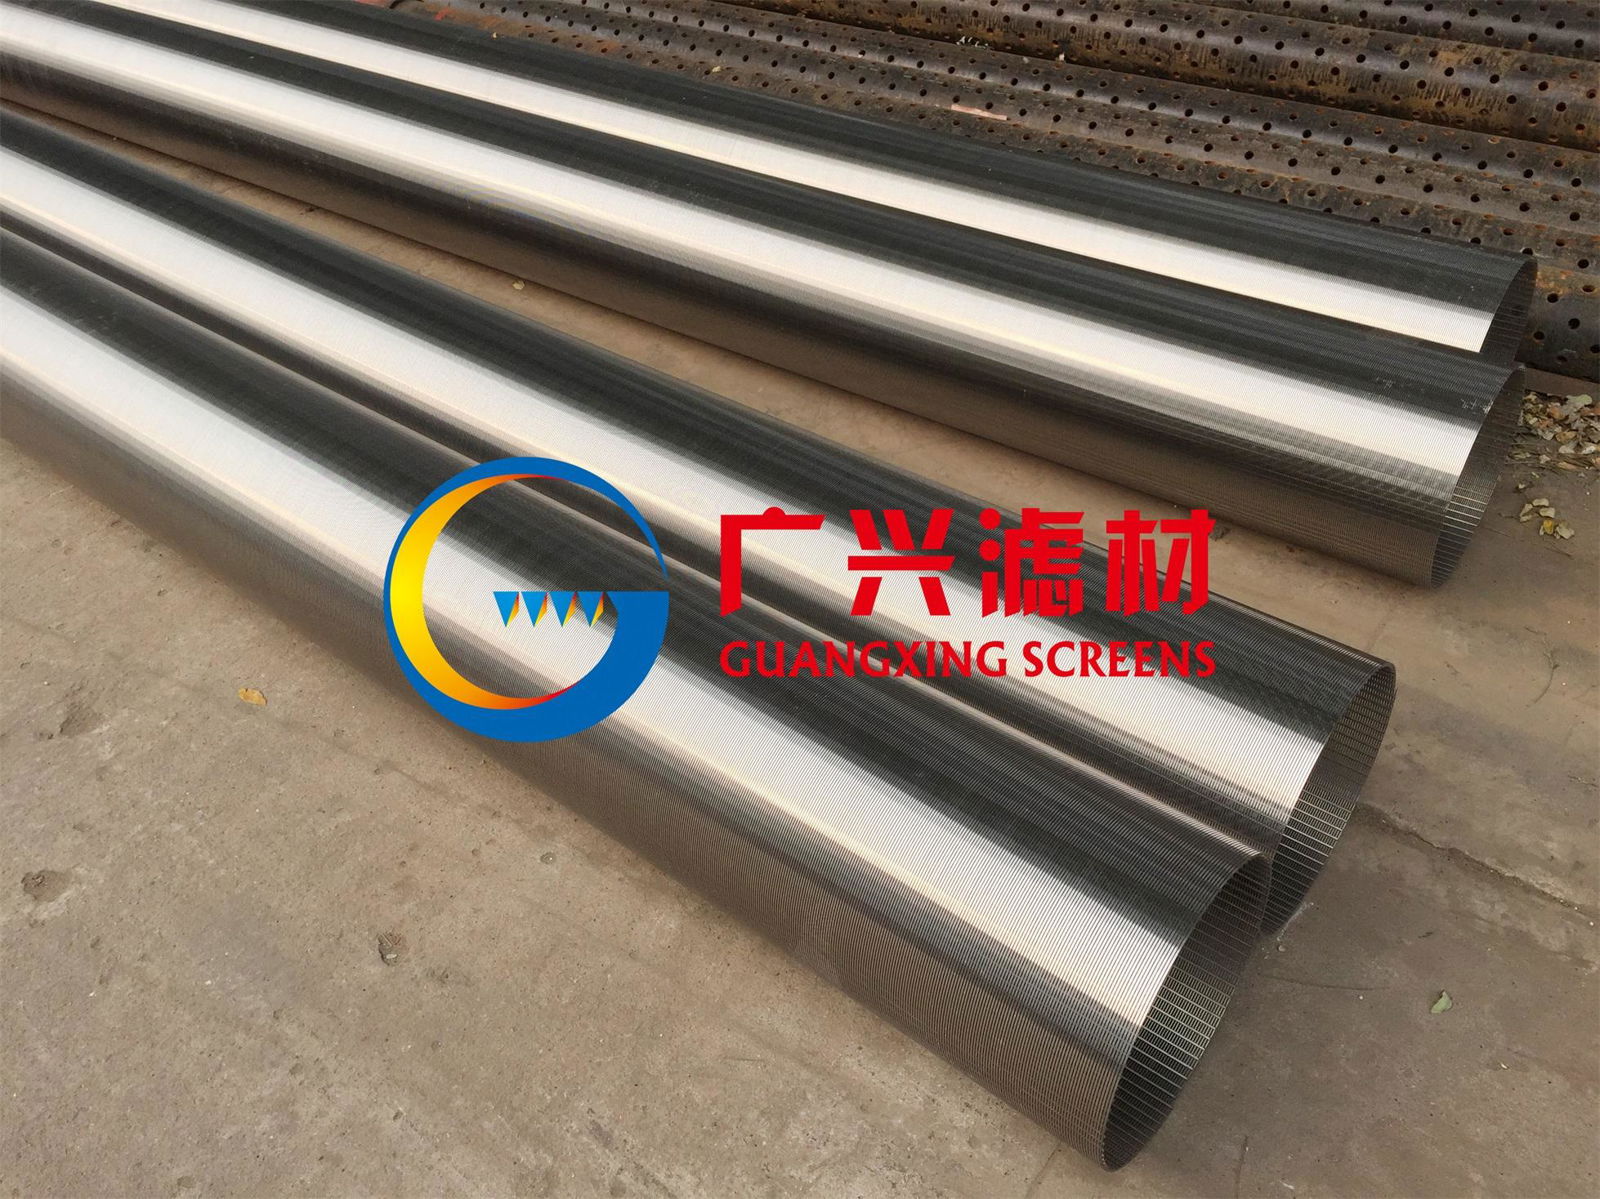 Stainless steel wedge shaped sand control filter tubes for water wells 4